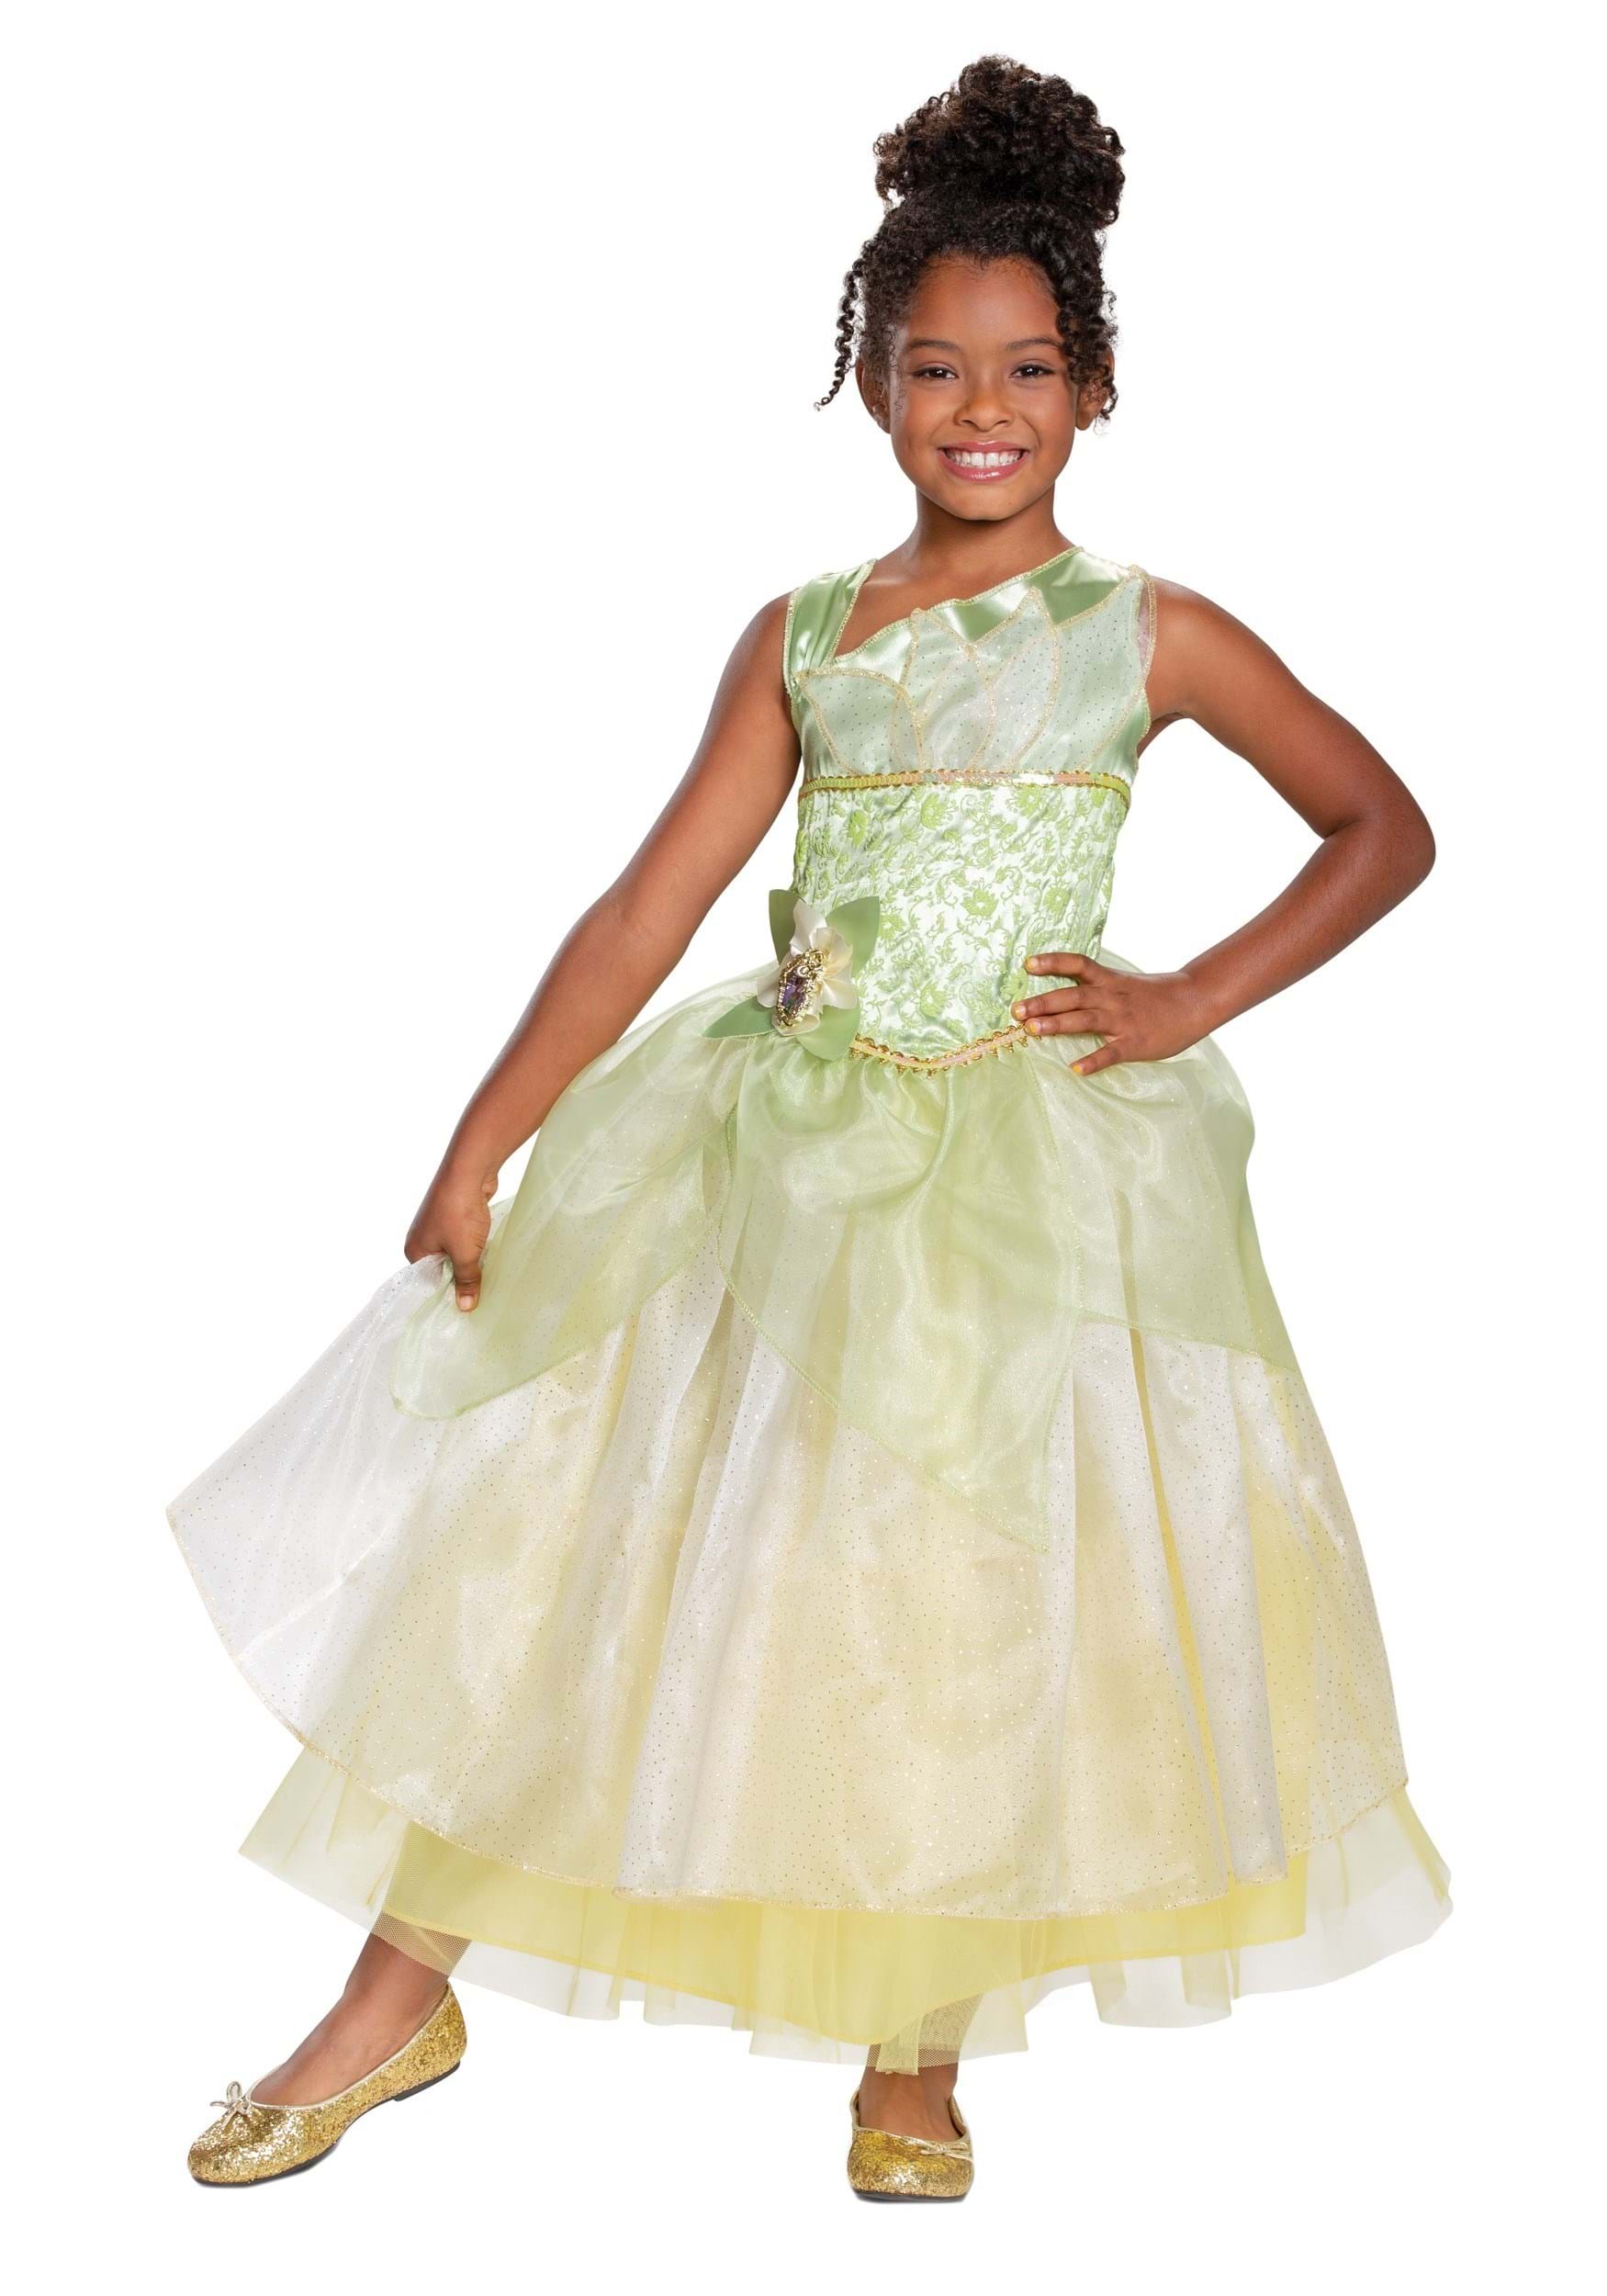 Image of The Princess & The Frog Deluxe Tiana Girl's Costume ID DI89273-7/8